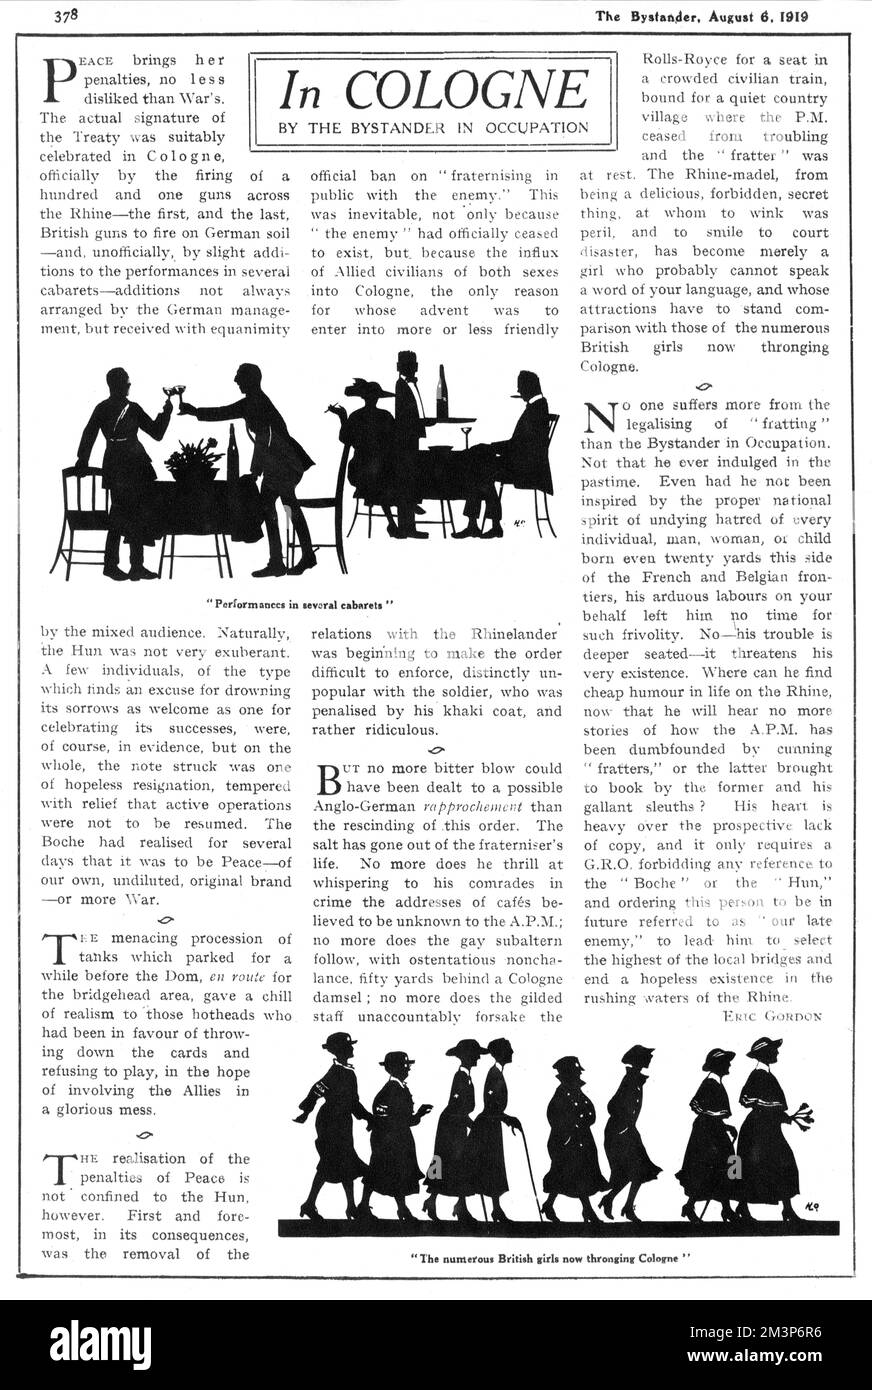 A page showing The Bystander magazine's regular column in 1919 - The Bystander in Occupation - reporting on news from occupied Germany in the aftermath of World War One.  Written by Eric Gordon who was in Cologne, with illustrations by the silhouette artist, Captain H. L. Oakley who was in England at the time.  Pictures show British officers in a German restaurant, and British women in various services.     Date: 1919 Stock Photo